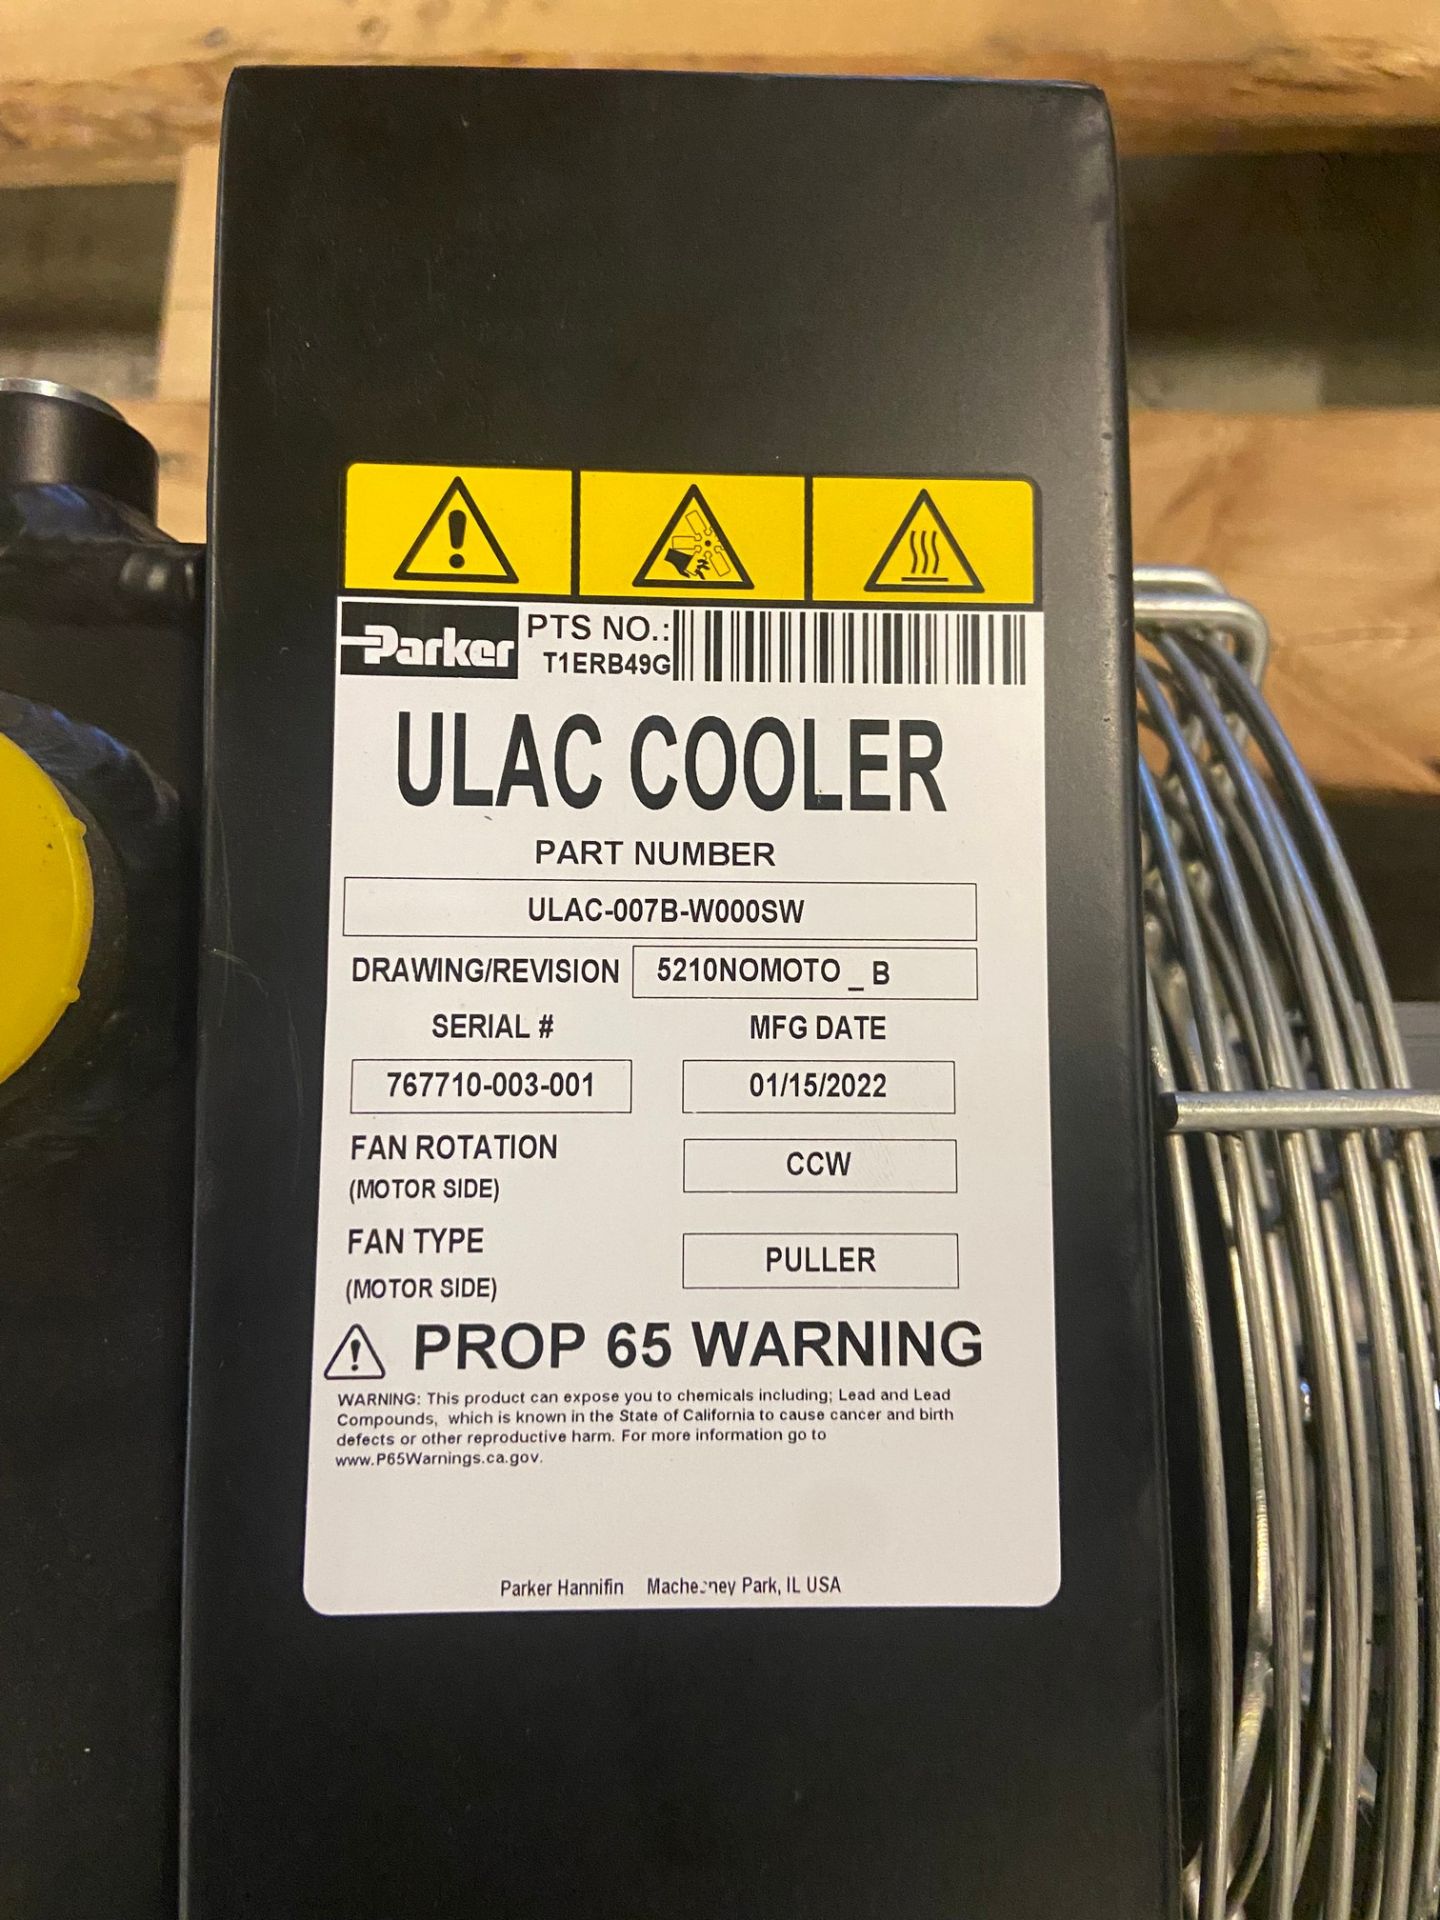 2022 PARKER ULAC-0078-WODOSW ULAC COOLER, S/N: 767710-003-001 - Image 3 of 3